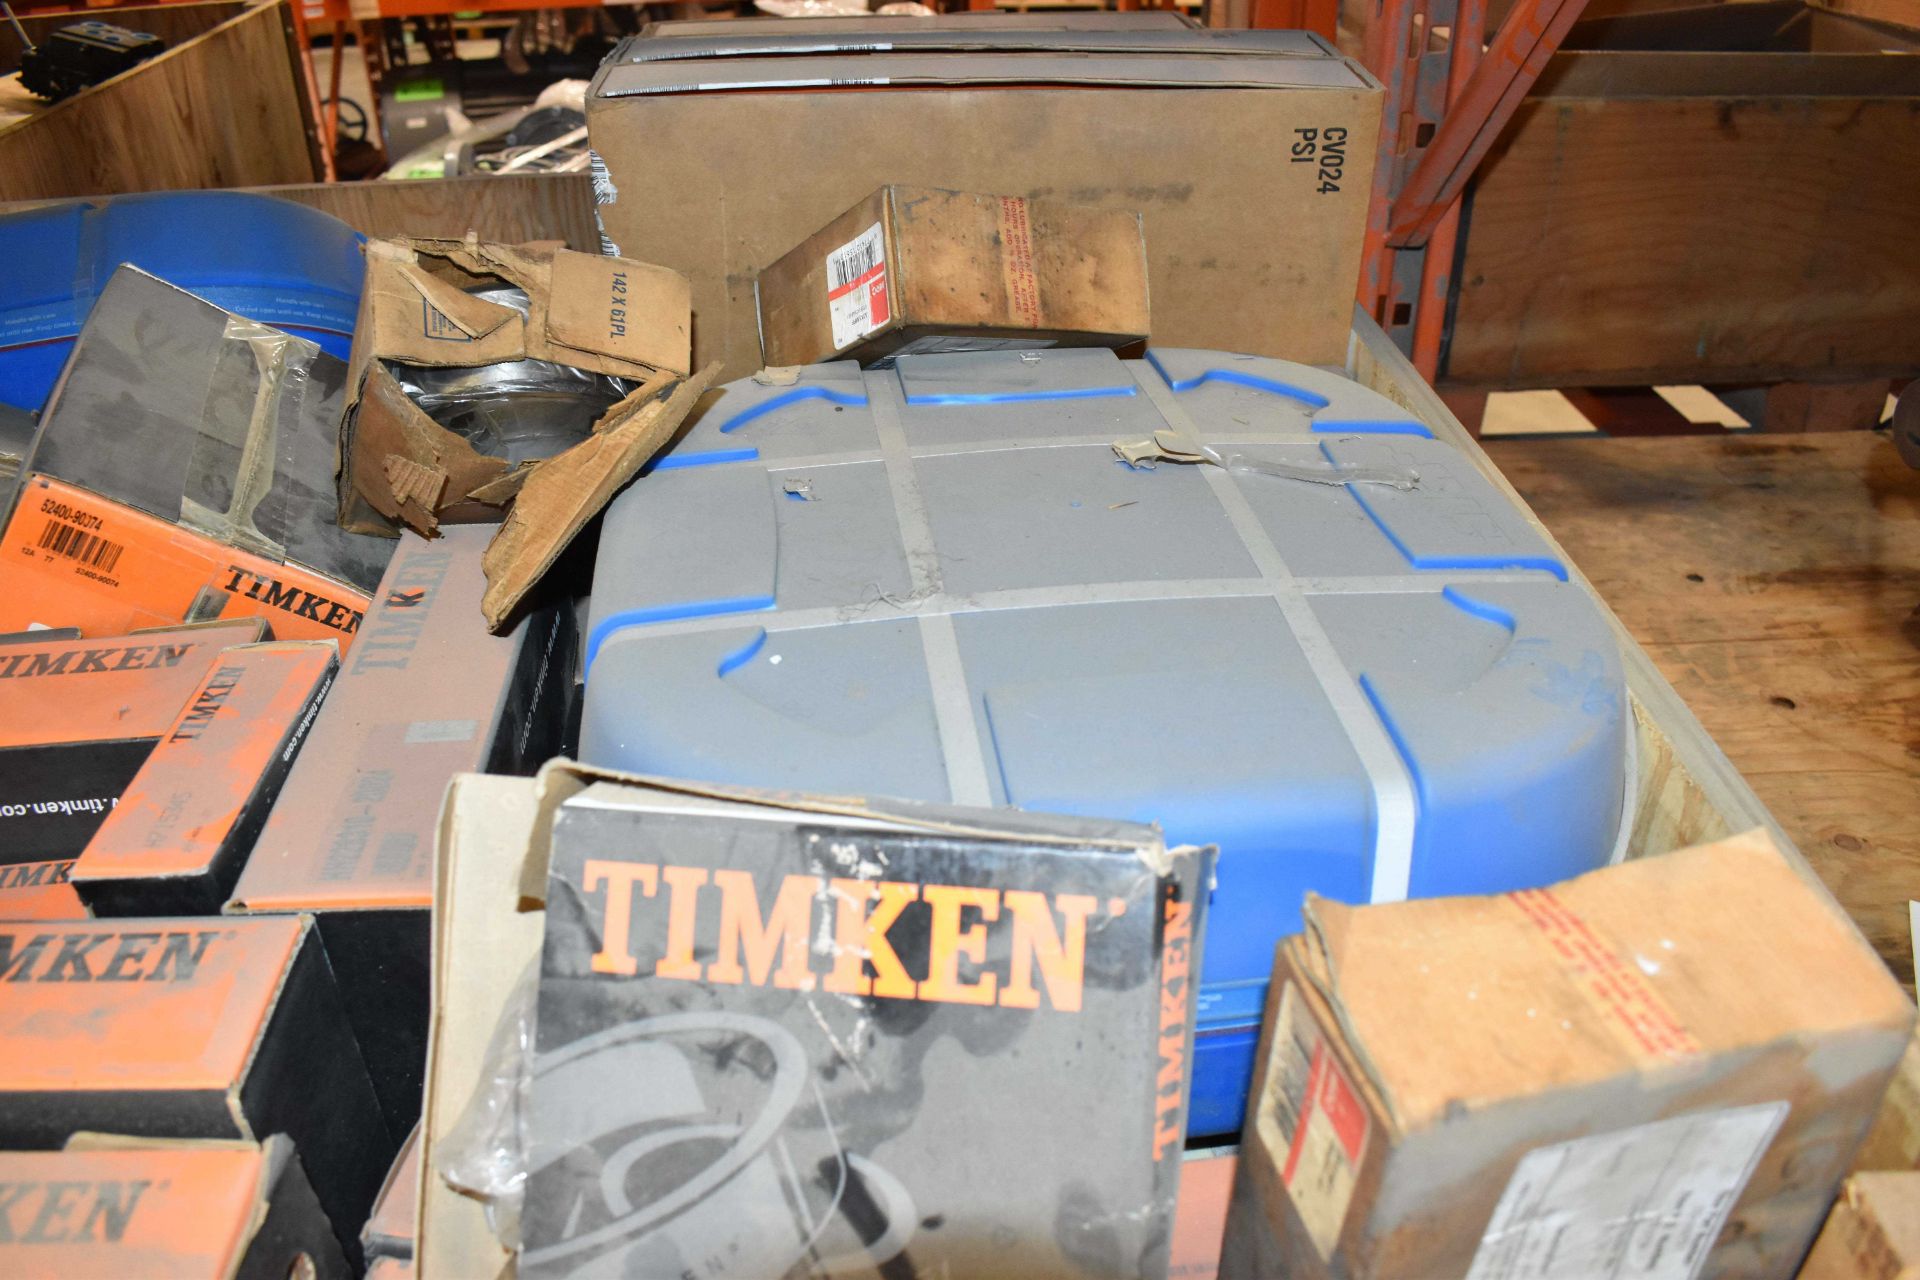 LOT/ CRATE WITH TIMKEN & SKG BEARINGS (CMD WAREHOUSE - 08020201) - Image 3 of 3